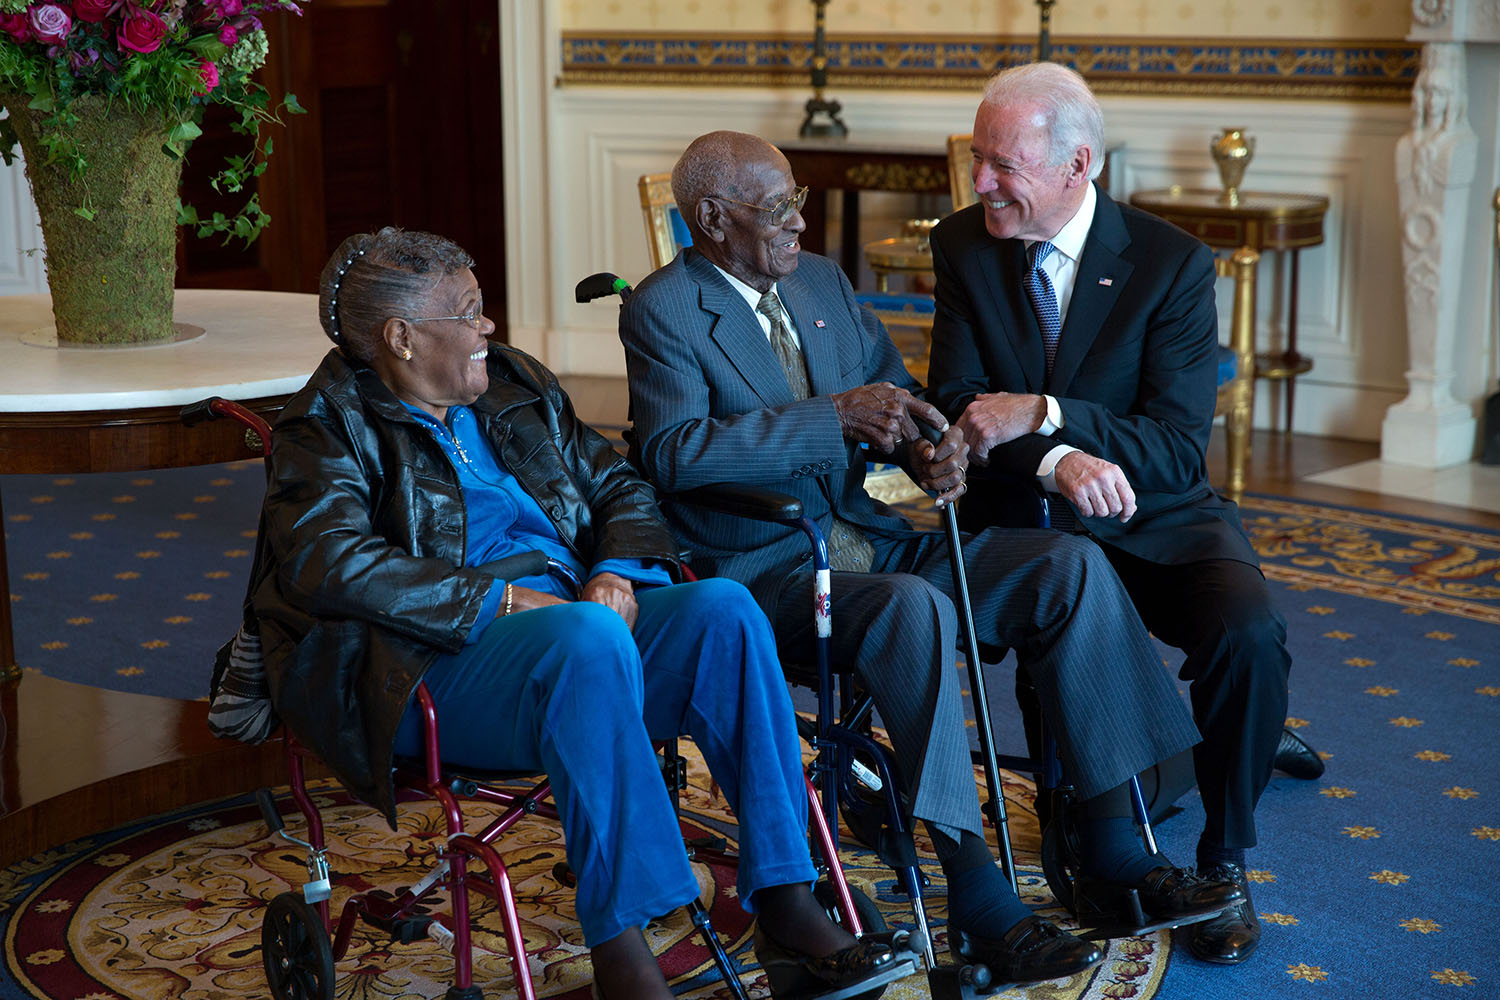 Vice President Joe Biden talks with Richard Overton and Earlene Love-Karo during a Veterans Day receiving line in the Blue Room of the White House, Nov. 11, 2013.  Mr. Overton, 107 years old, is the oldest living World War II veteran. (Official White House Photo by Lawrence Jackson)

This official White House photograph is being made available only for publication by news organizations and/or for personal use printing by the subject(s) of the photograph. The photograph may not be manipulated in any way and may not be used in commercial or political materials, advertisements, emails, products, promotions that in any way suggests approval or endorsement of the President, the First Family, or the White House.